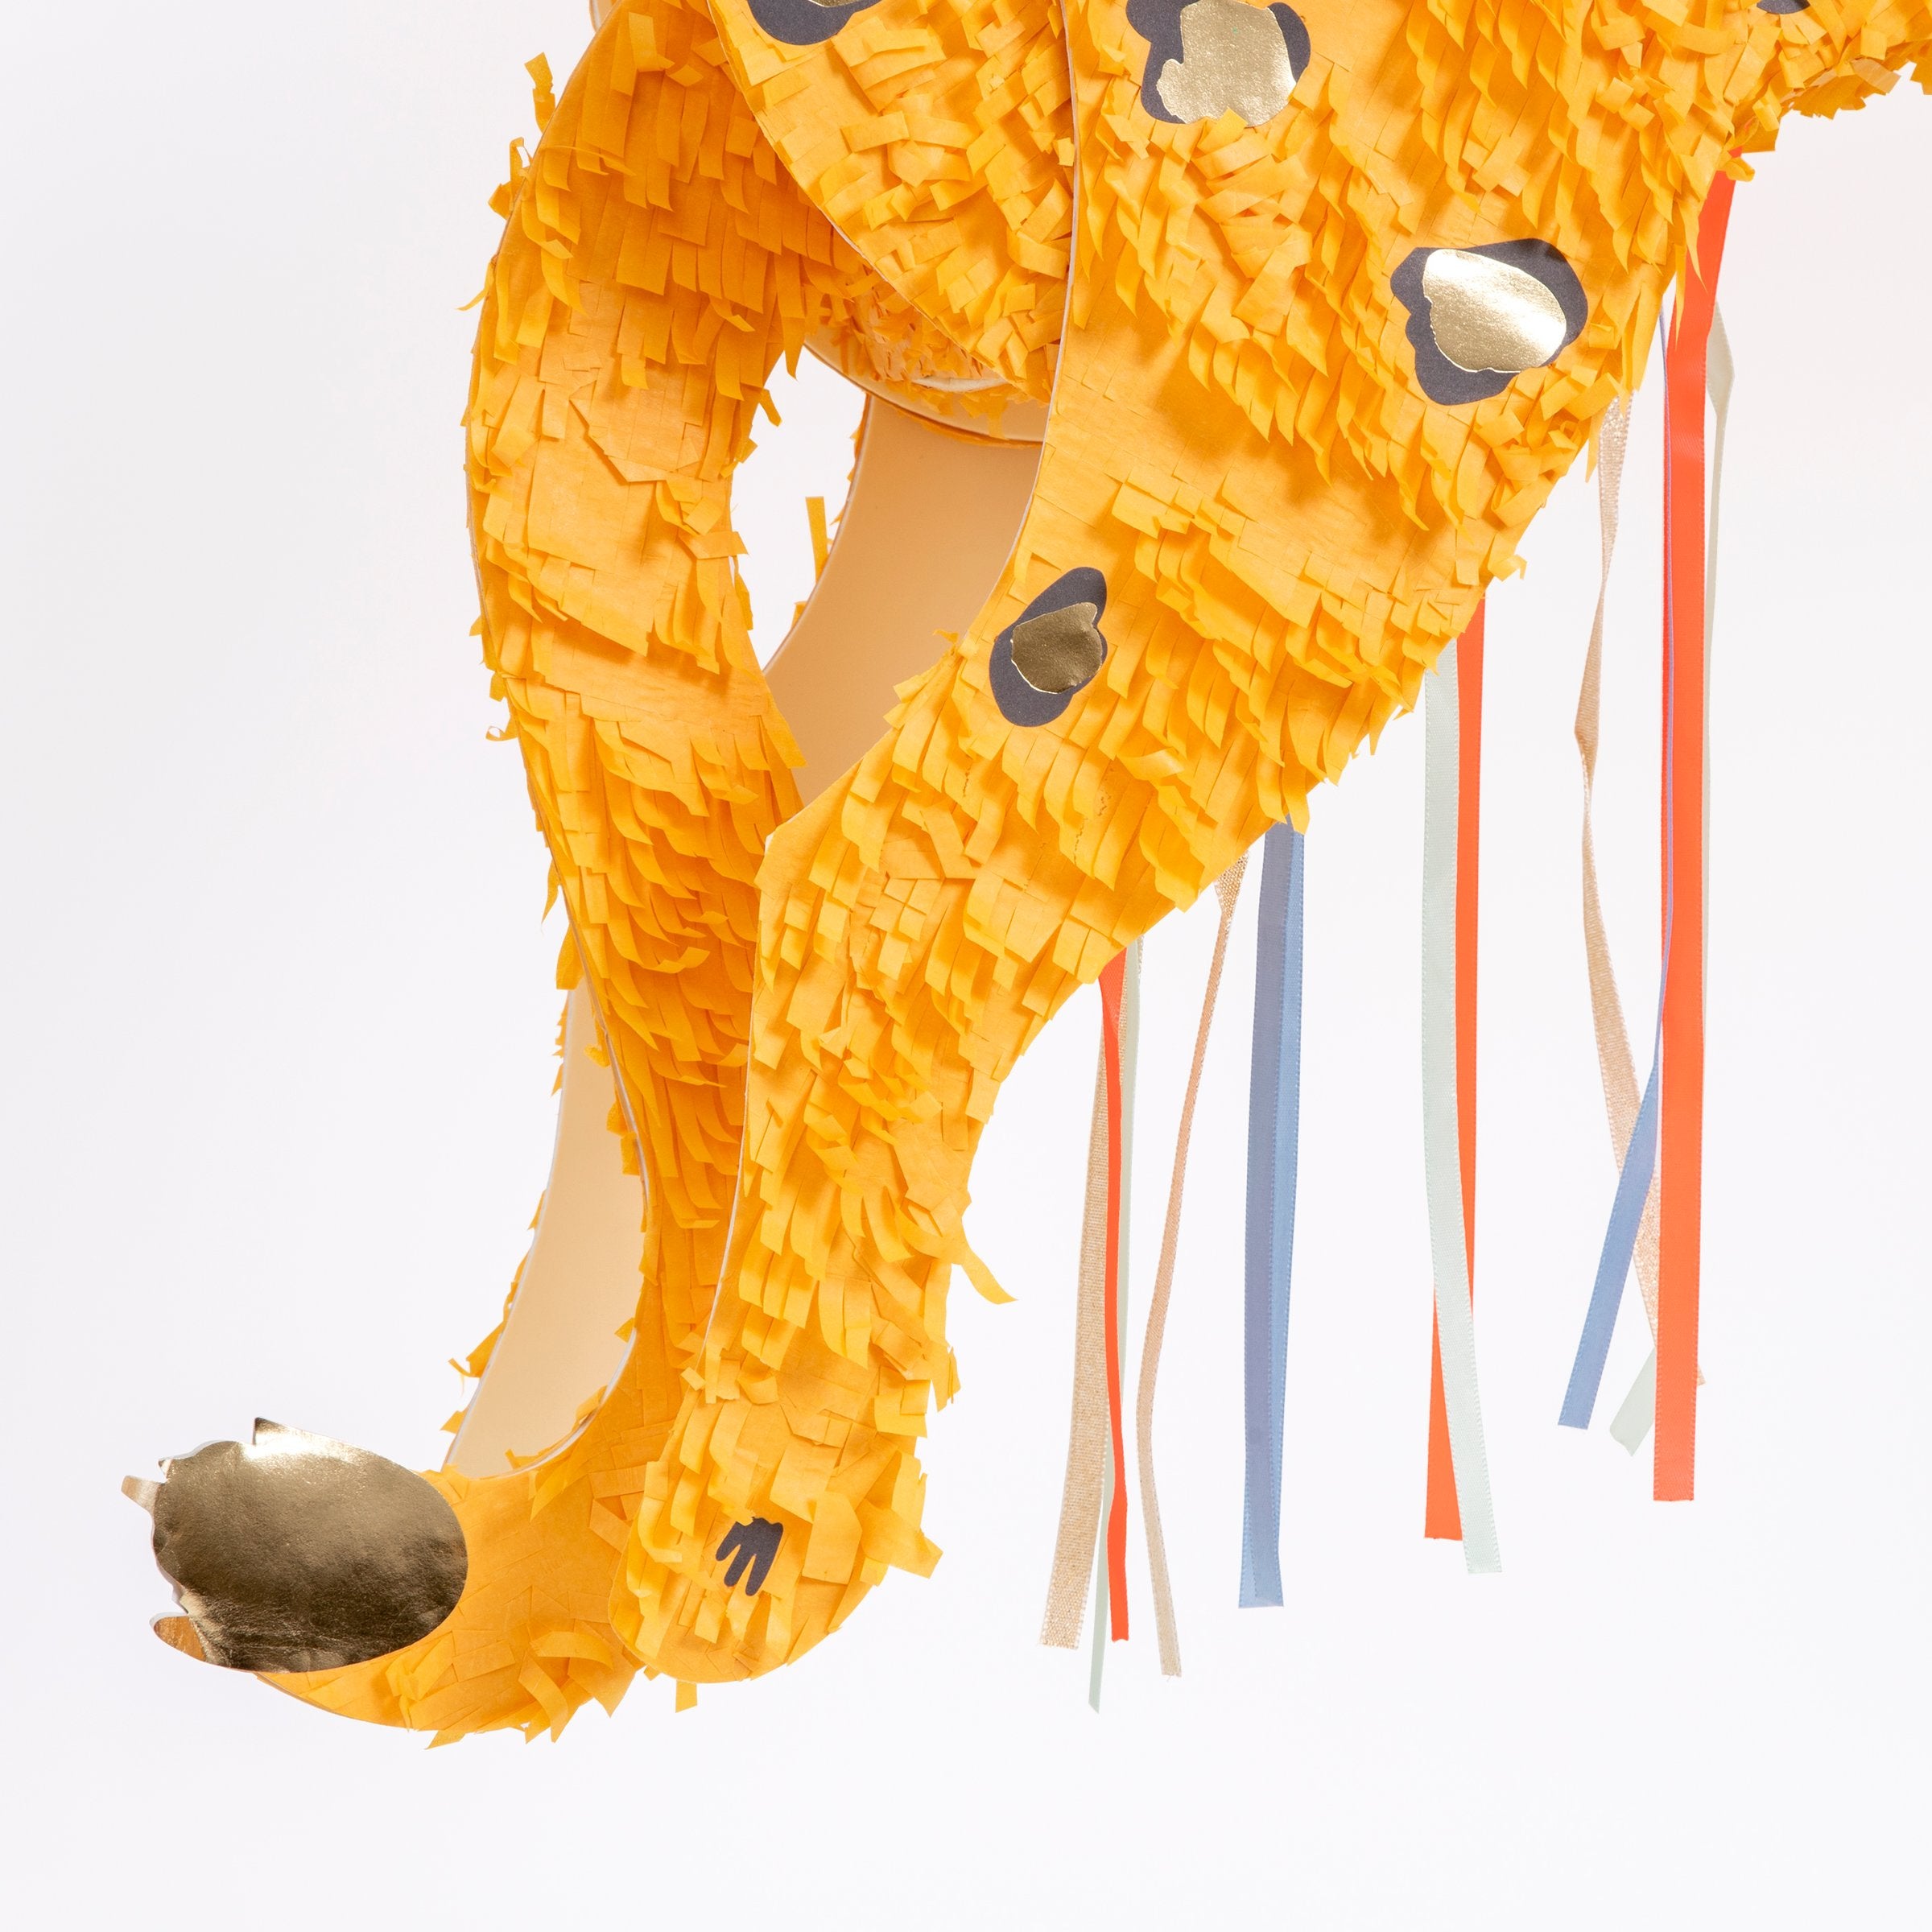 Add fun to your safari party theme with our cheetah piñata crafted with colourful ribbons, ready to fill with your own sweets and treats.